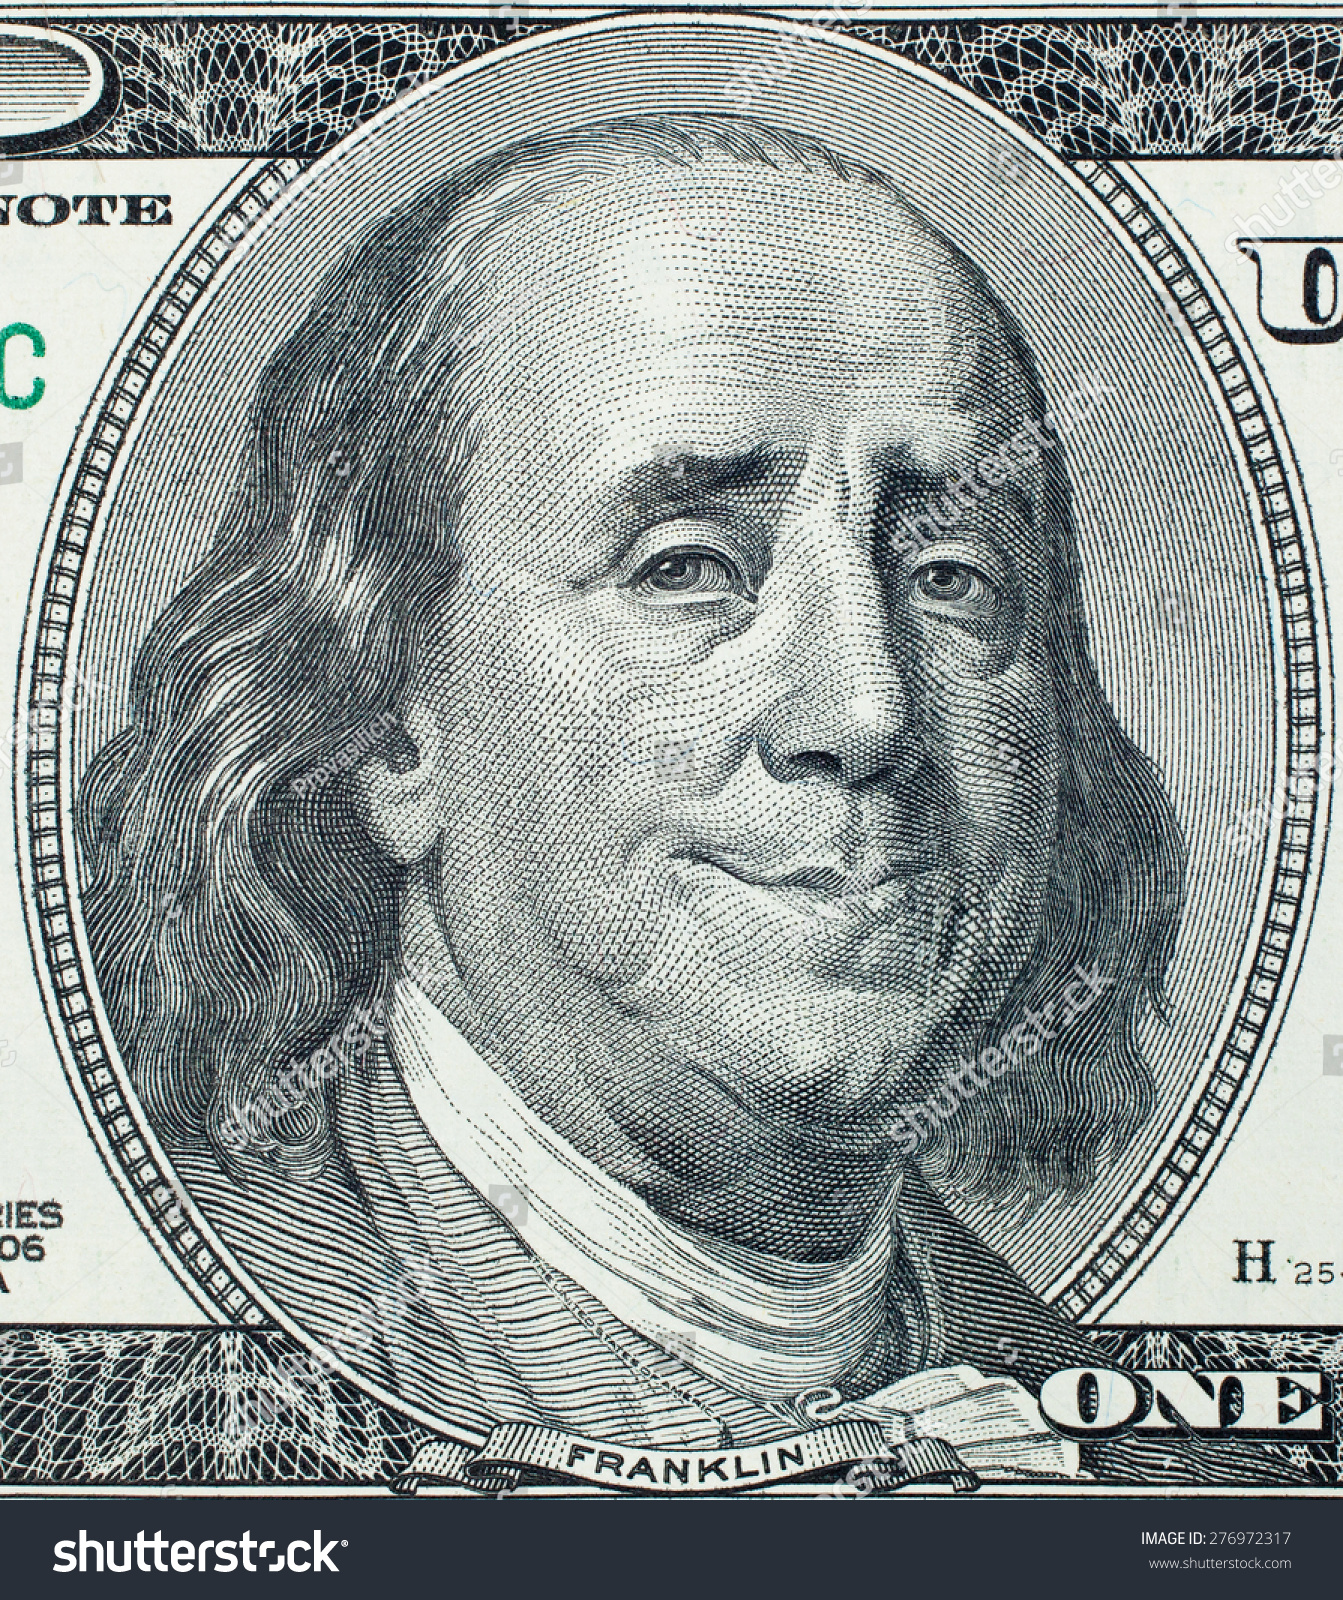 All 103+ Images Why Was Benjamin Franklin On The 100 Dollar Bill Full ...